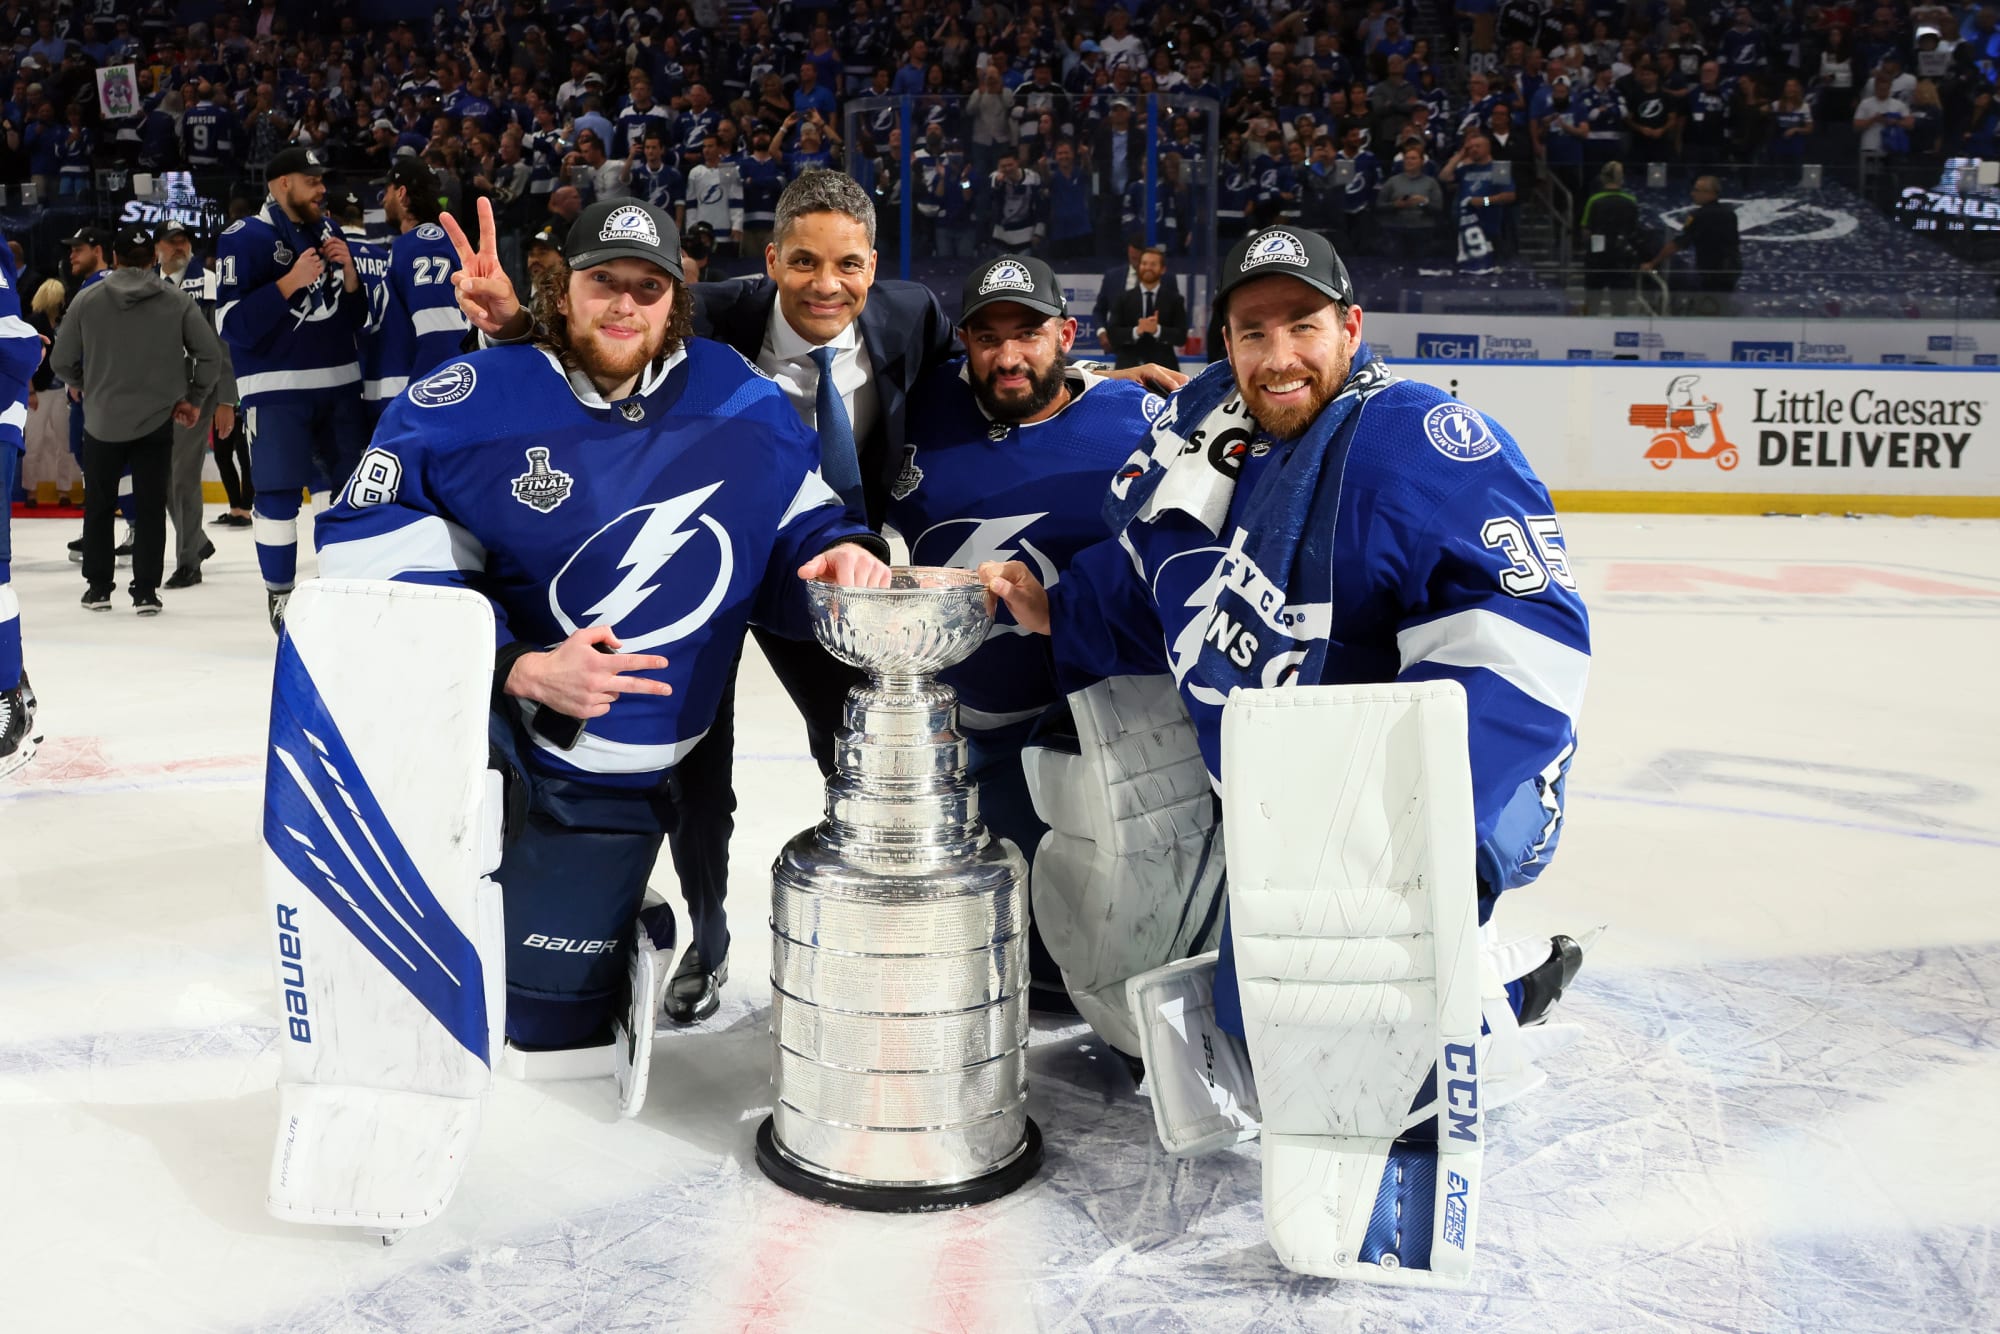 Coors Light Champions Ice beer celebrates the Tampa Bay Lightning win